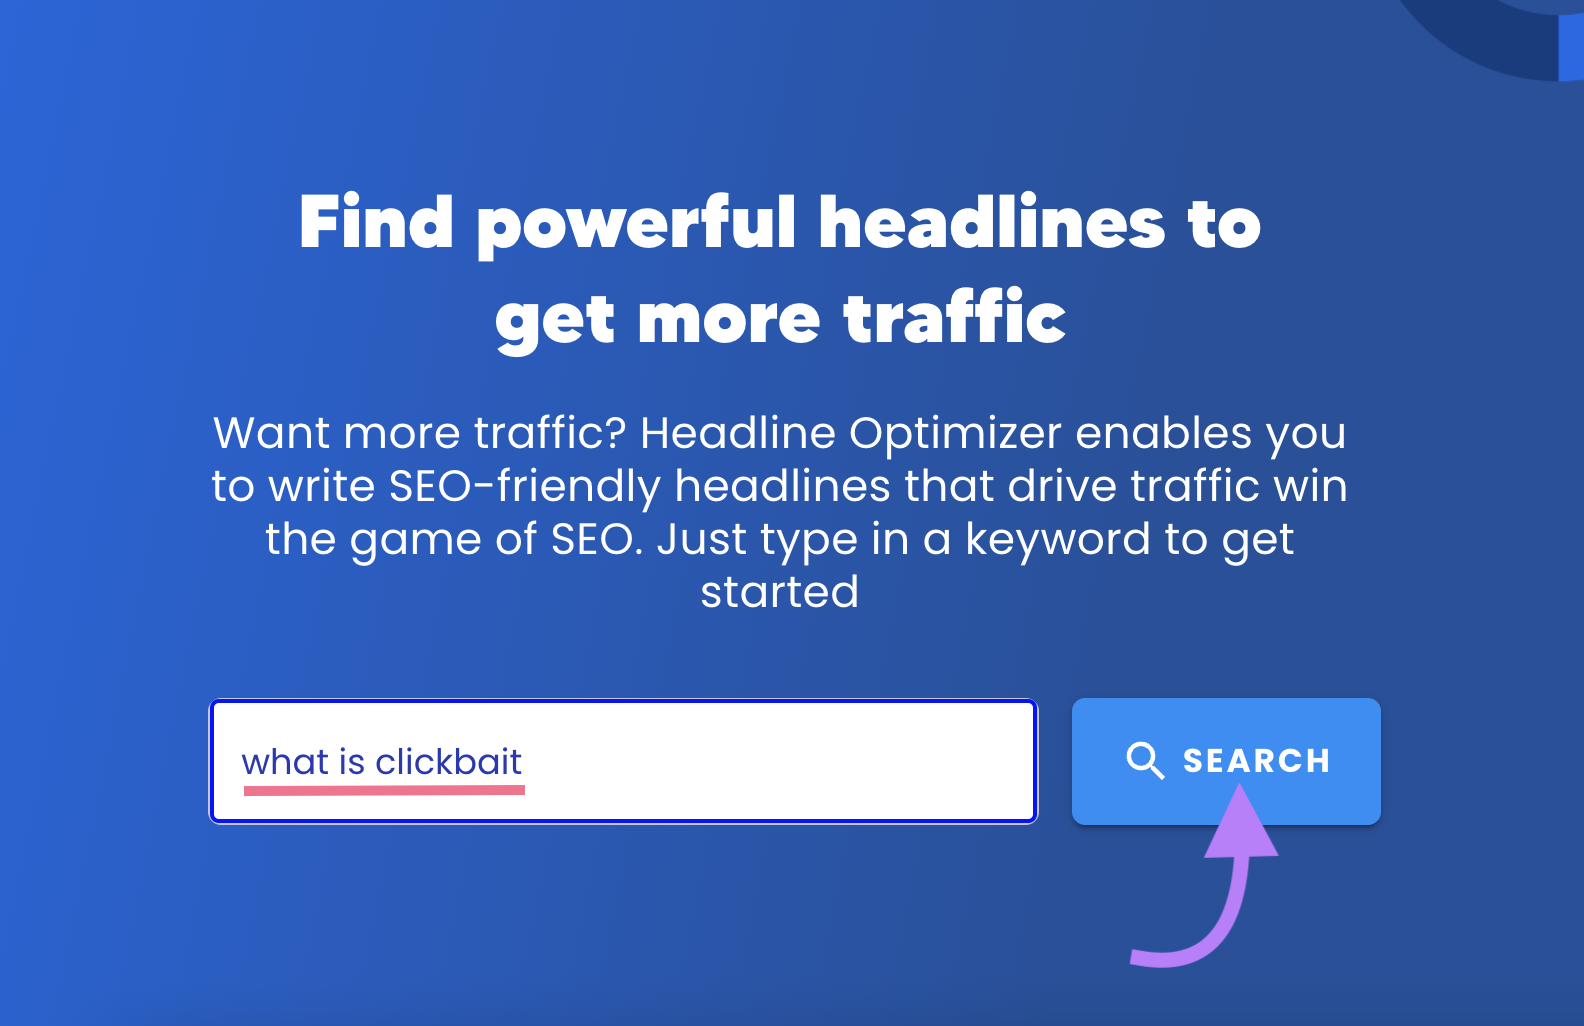 Search for "what is clickbait" in Headline Optimizer tool